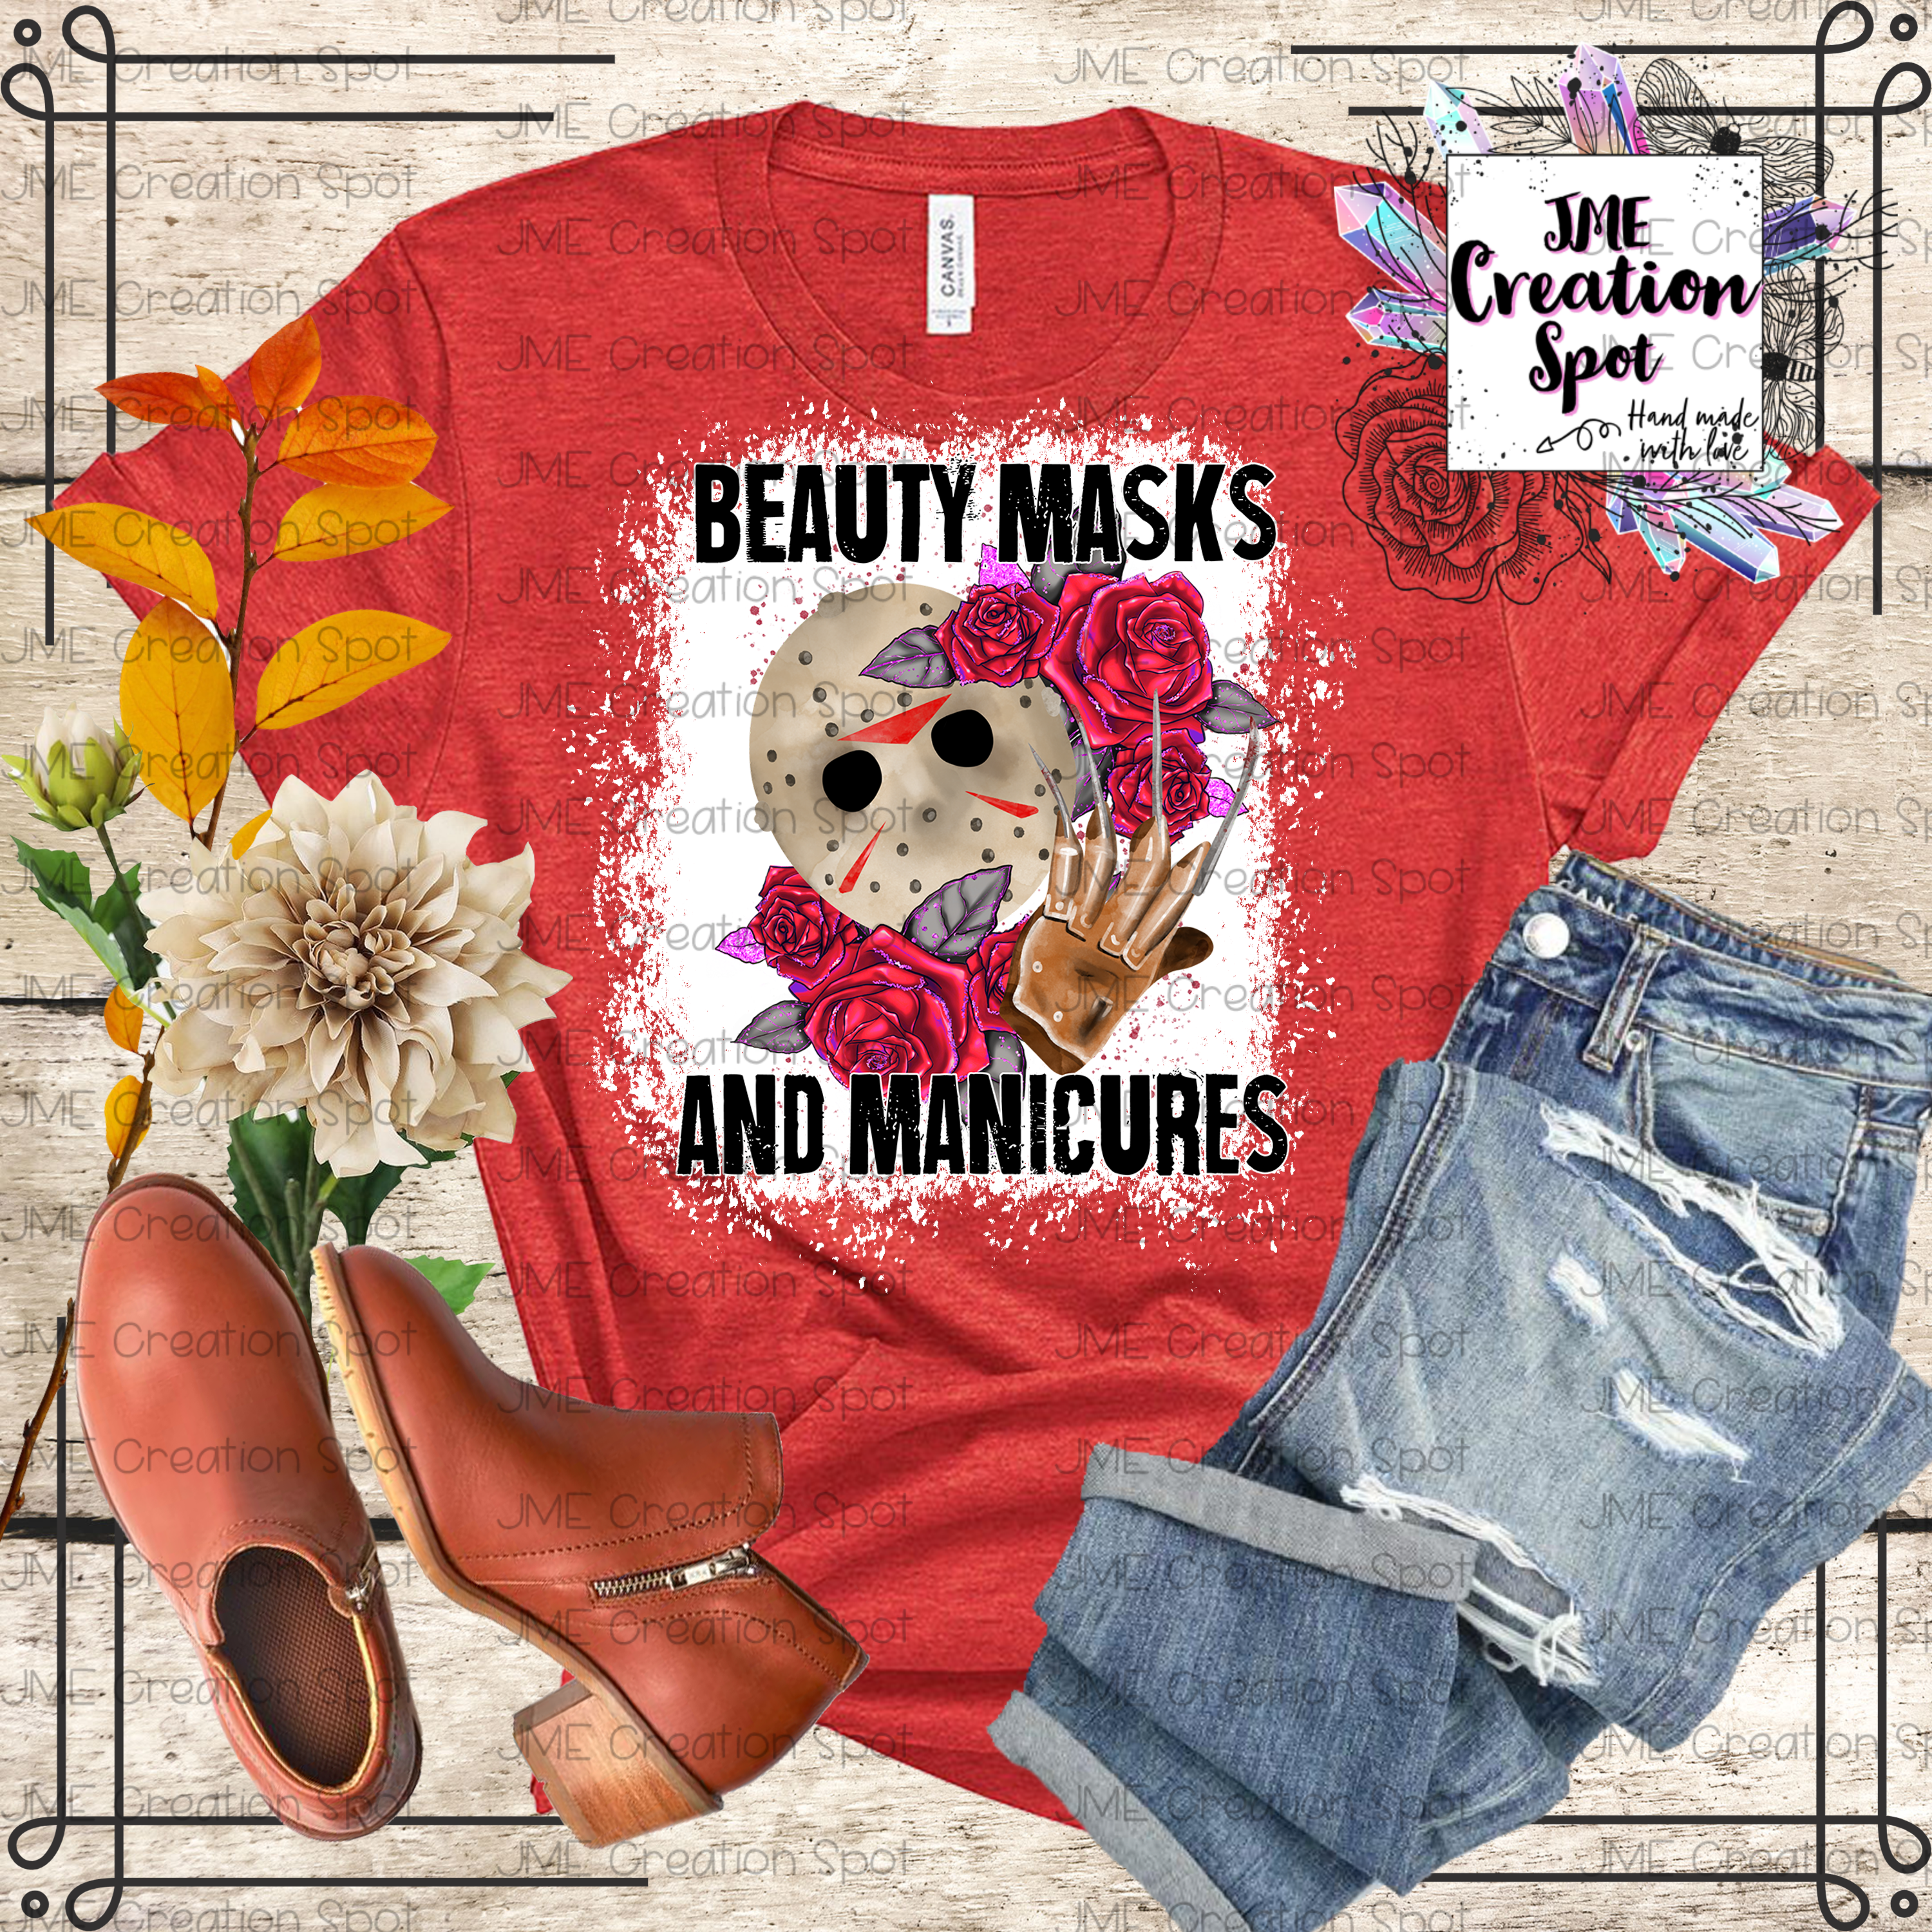 Beauty Masks and Manicures [Bleached]